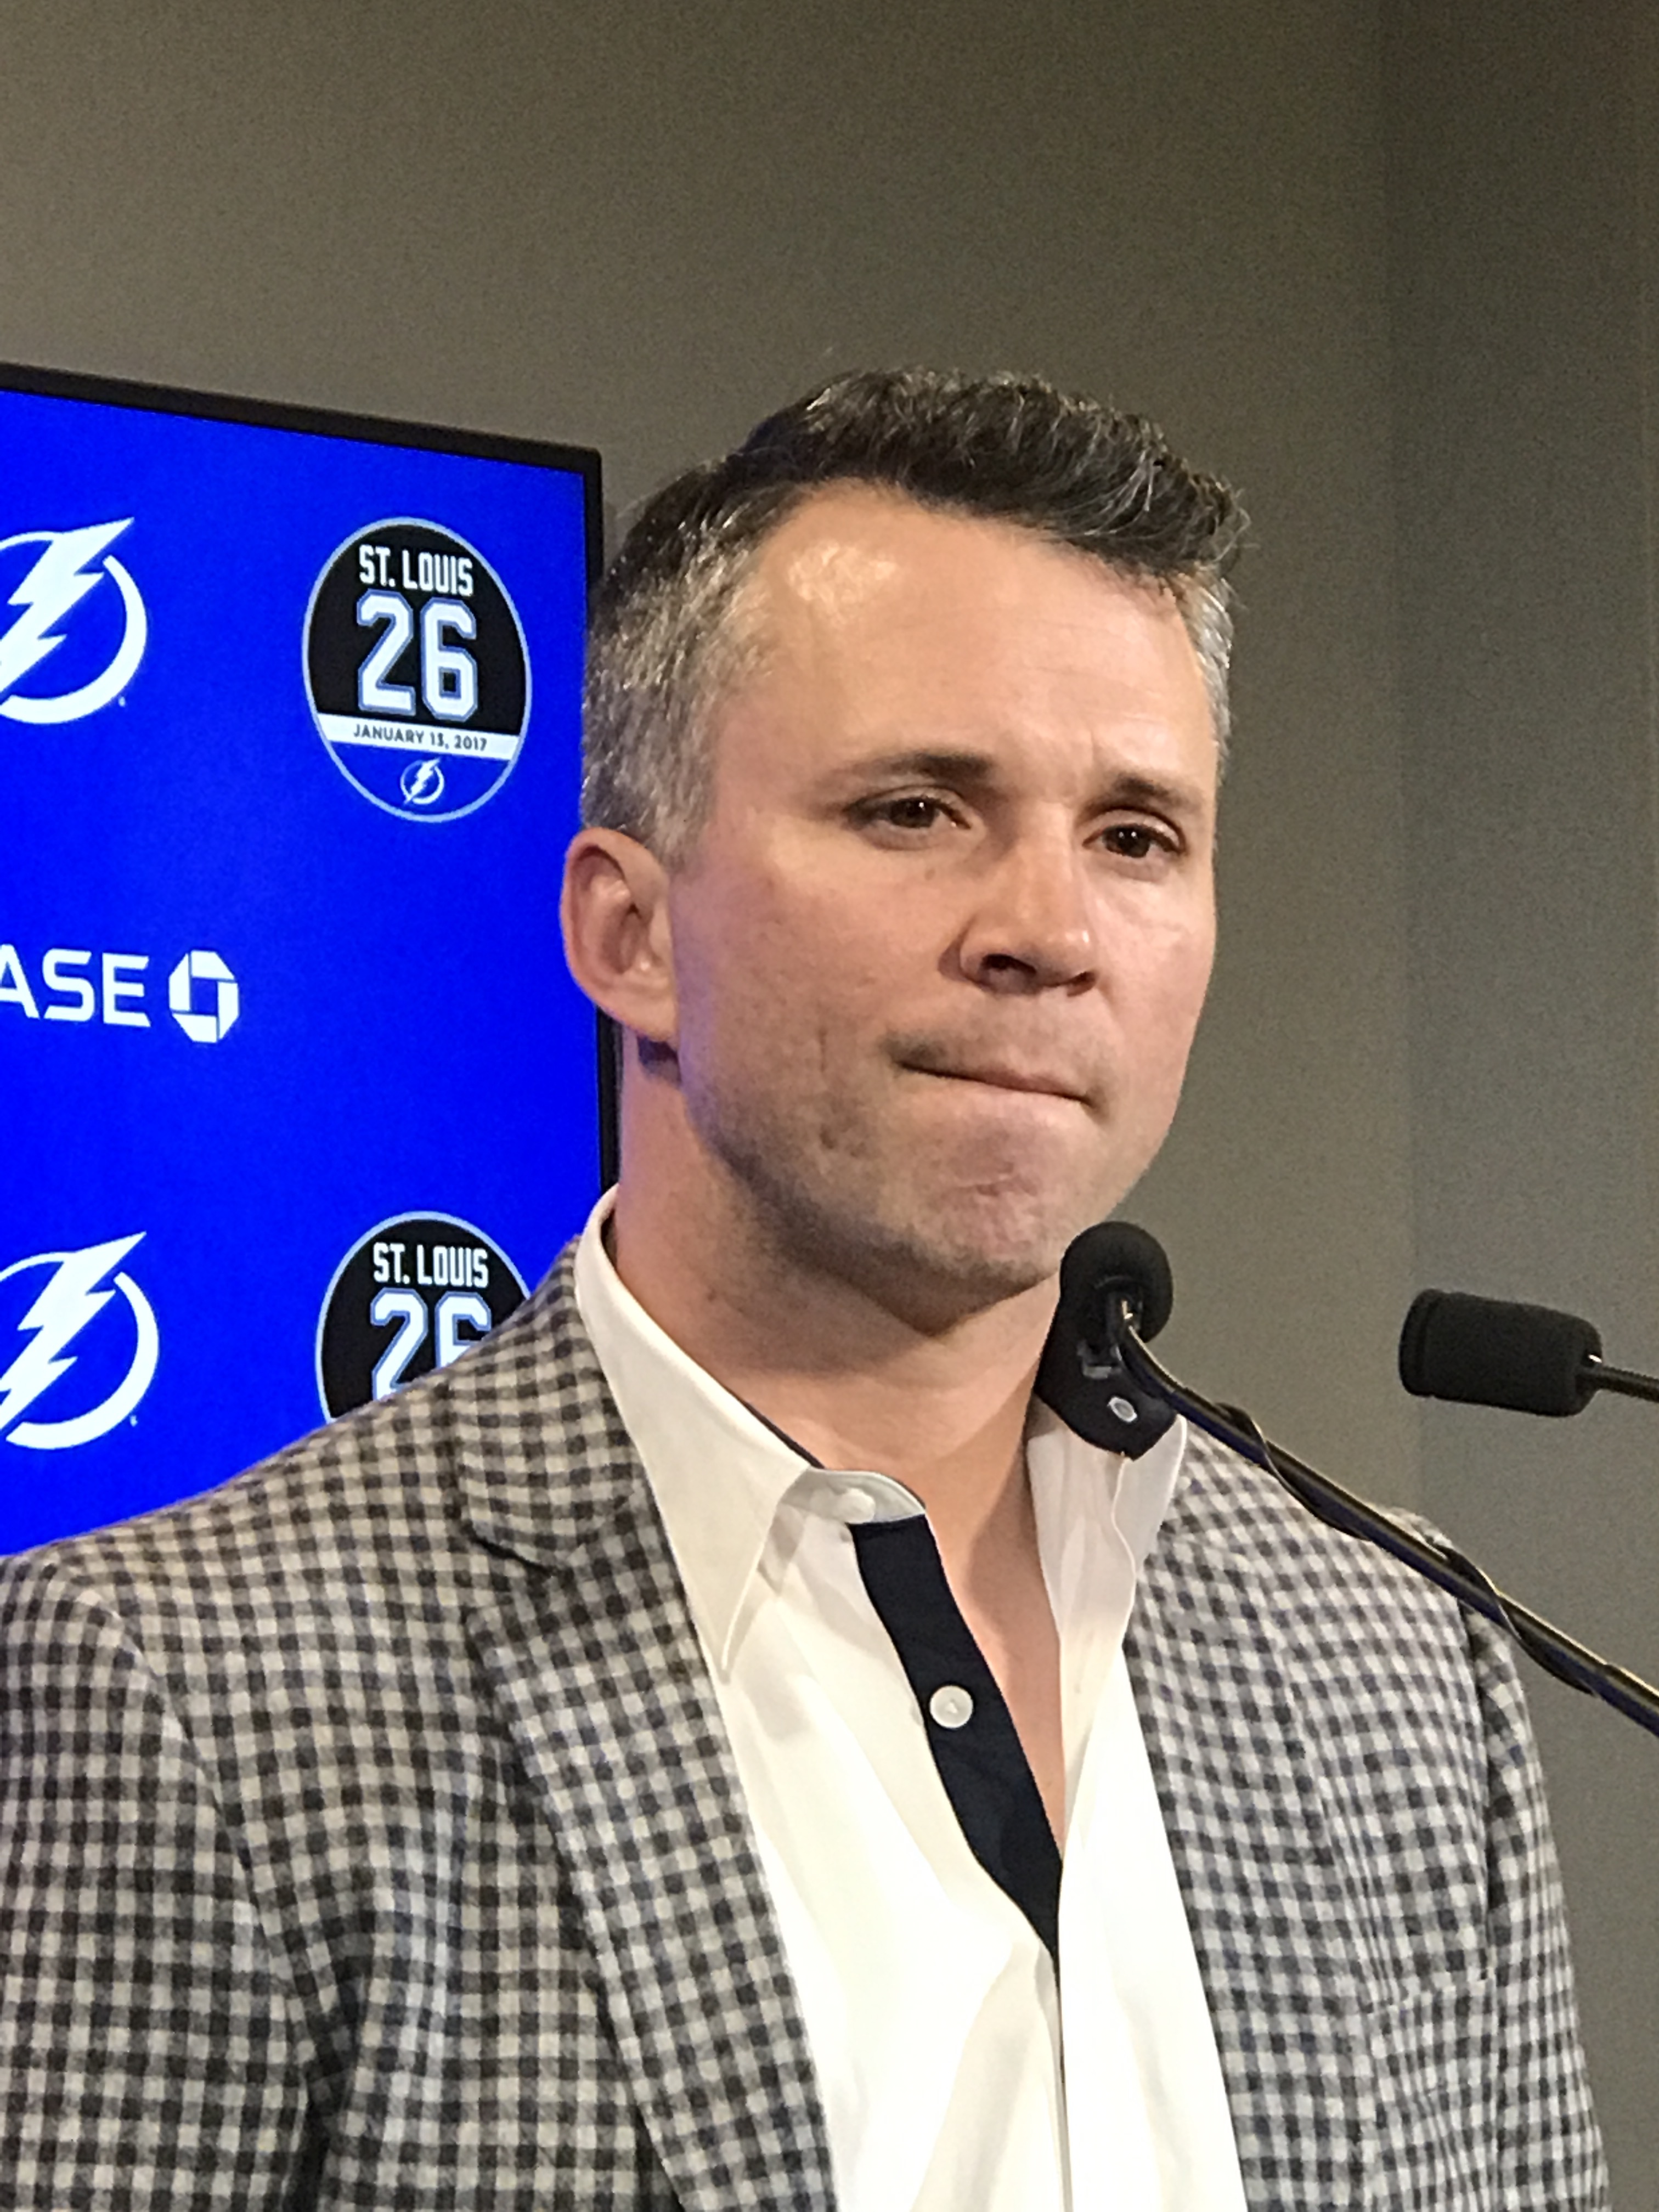 St. Louis says he grew up with Lightning.